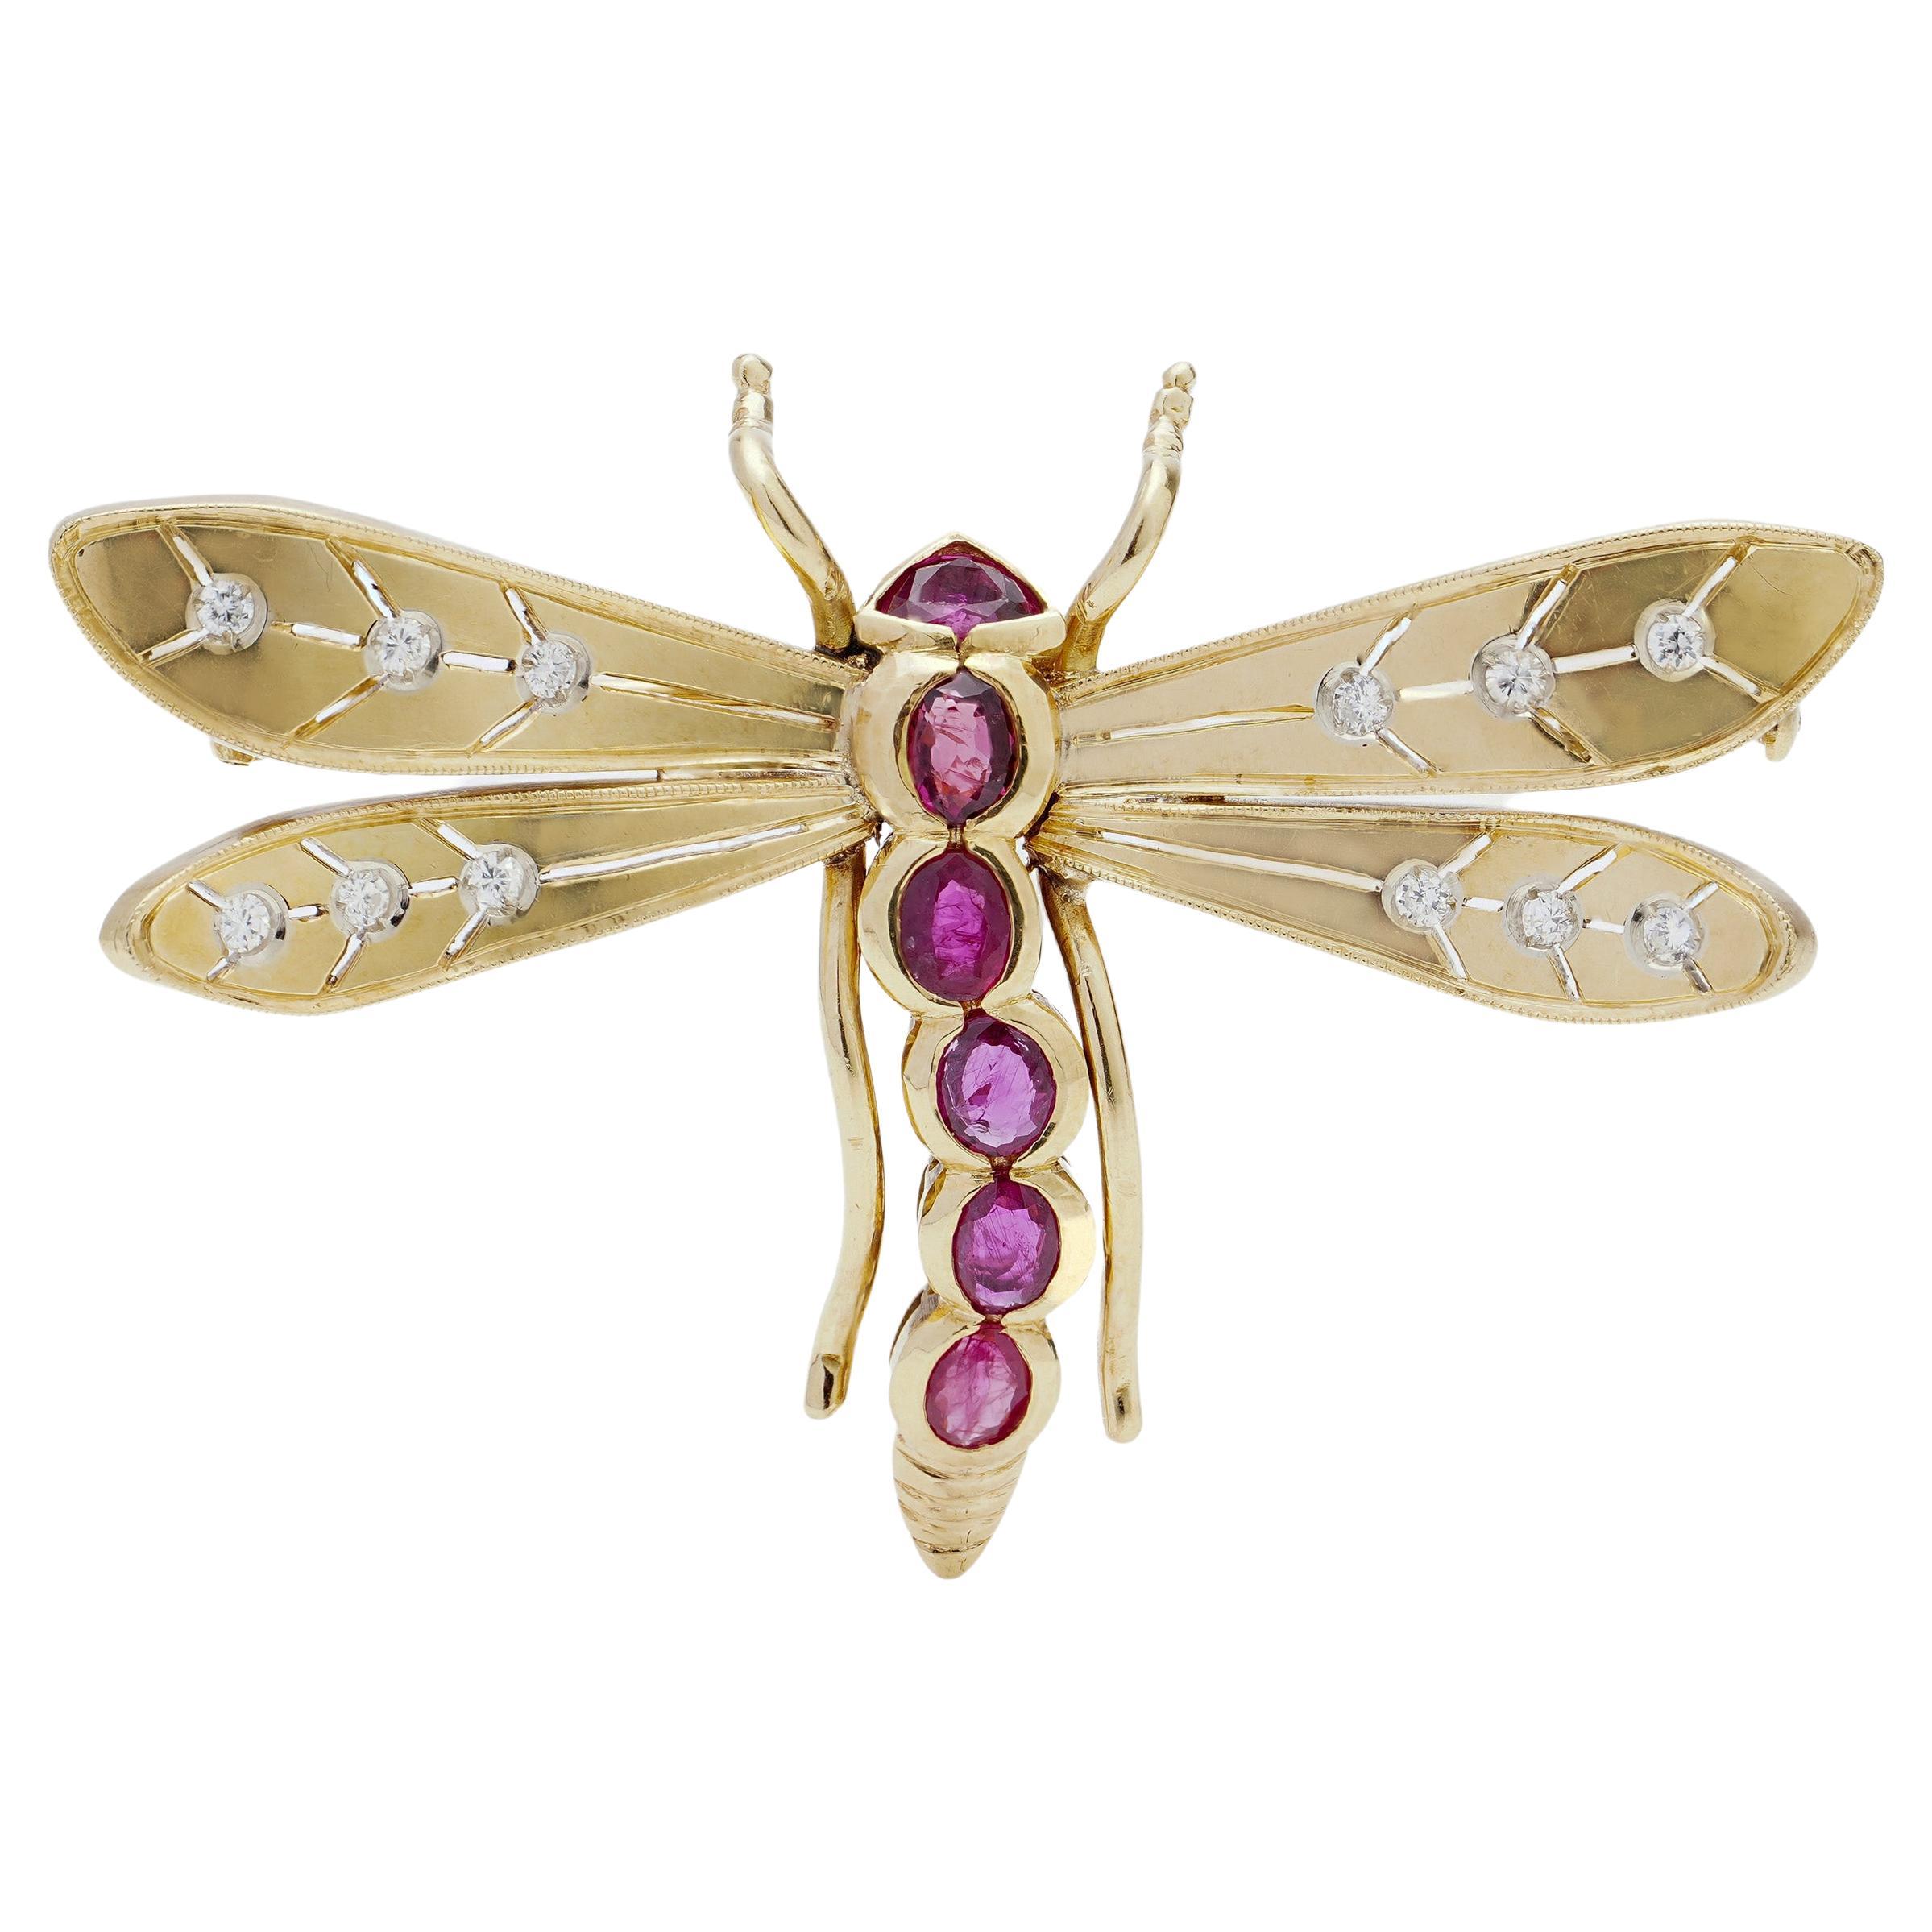 Details about   Vintage Gold Tone & Enamel Dragonfly Pin 